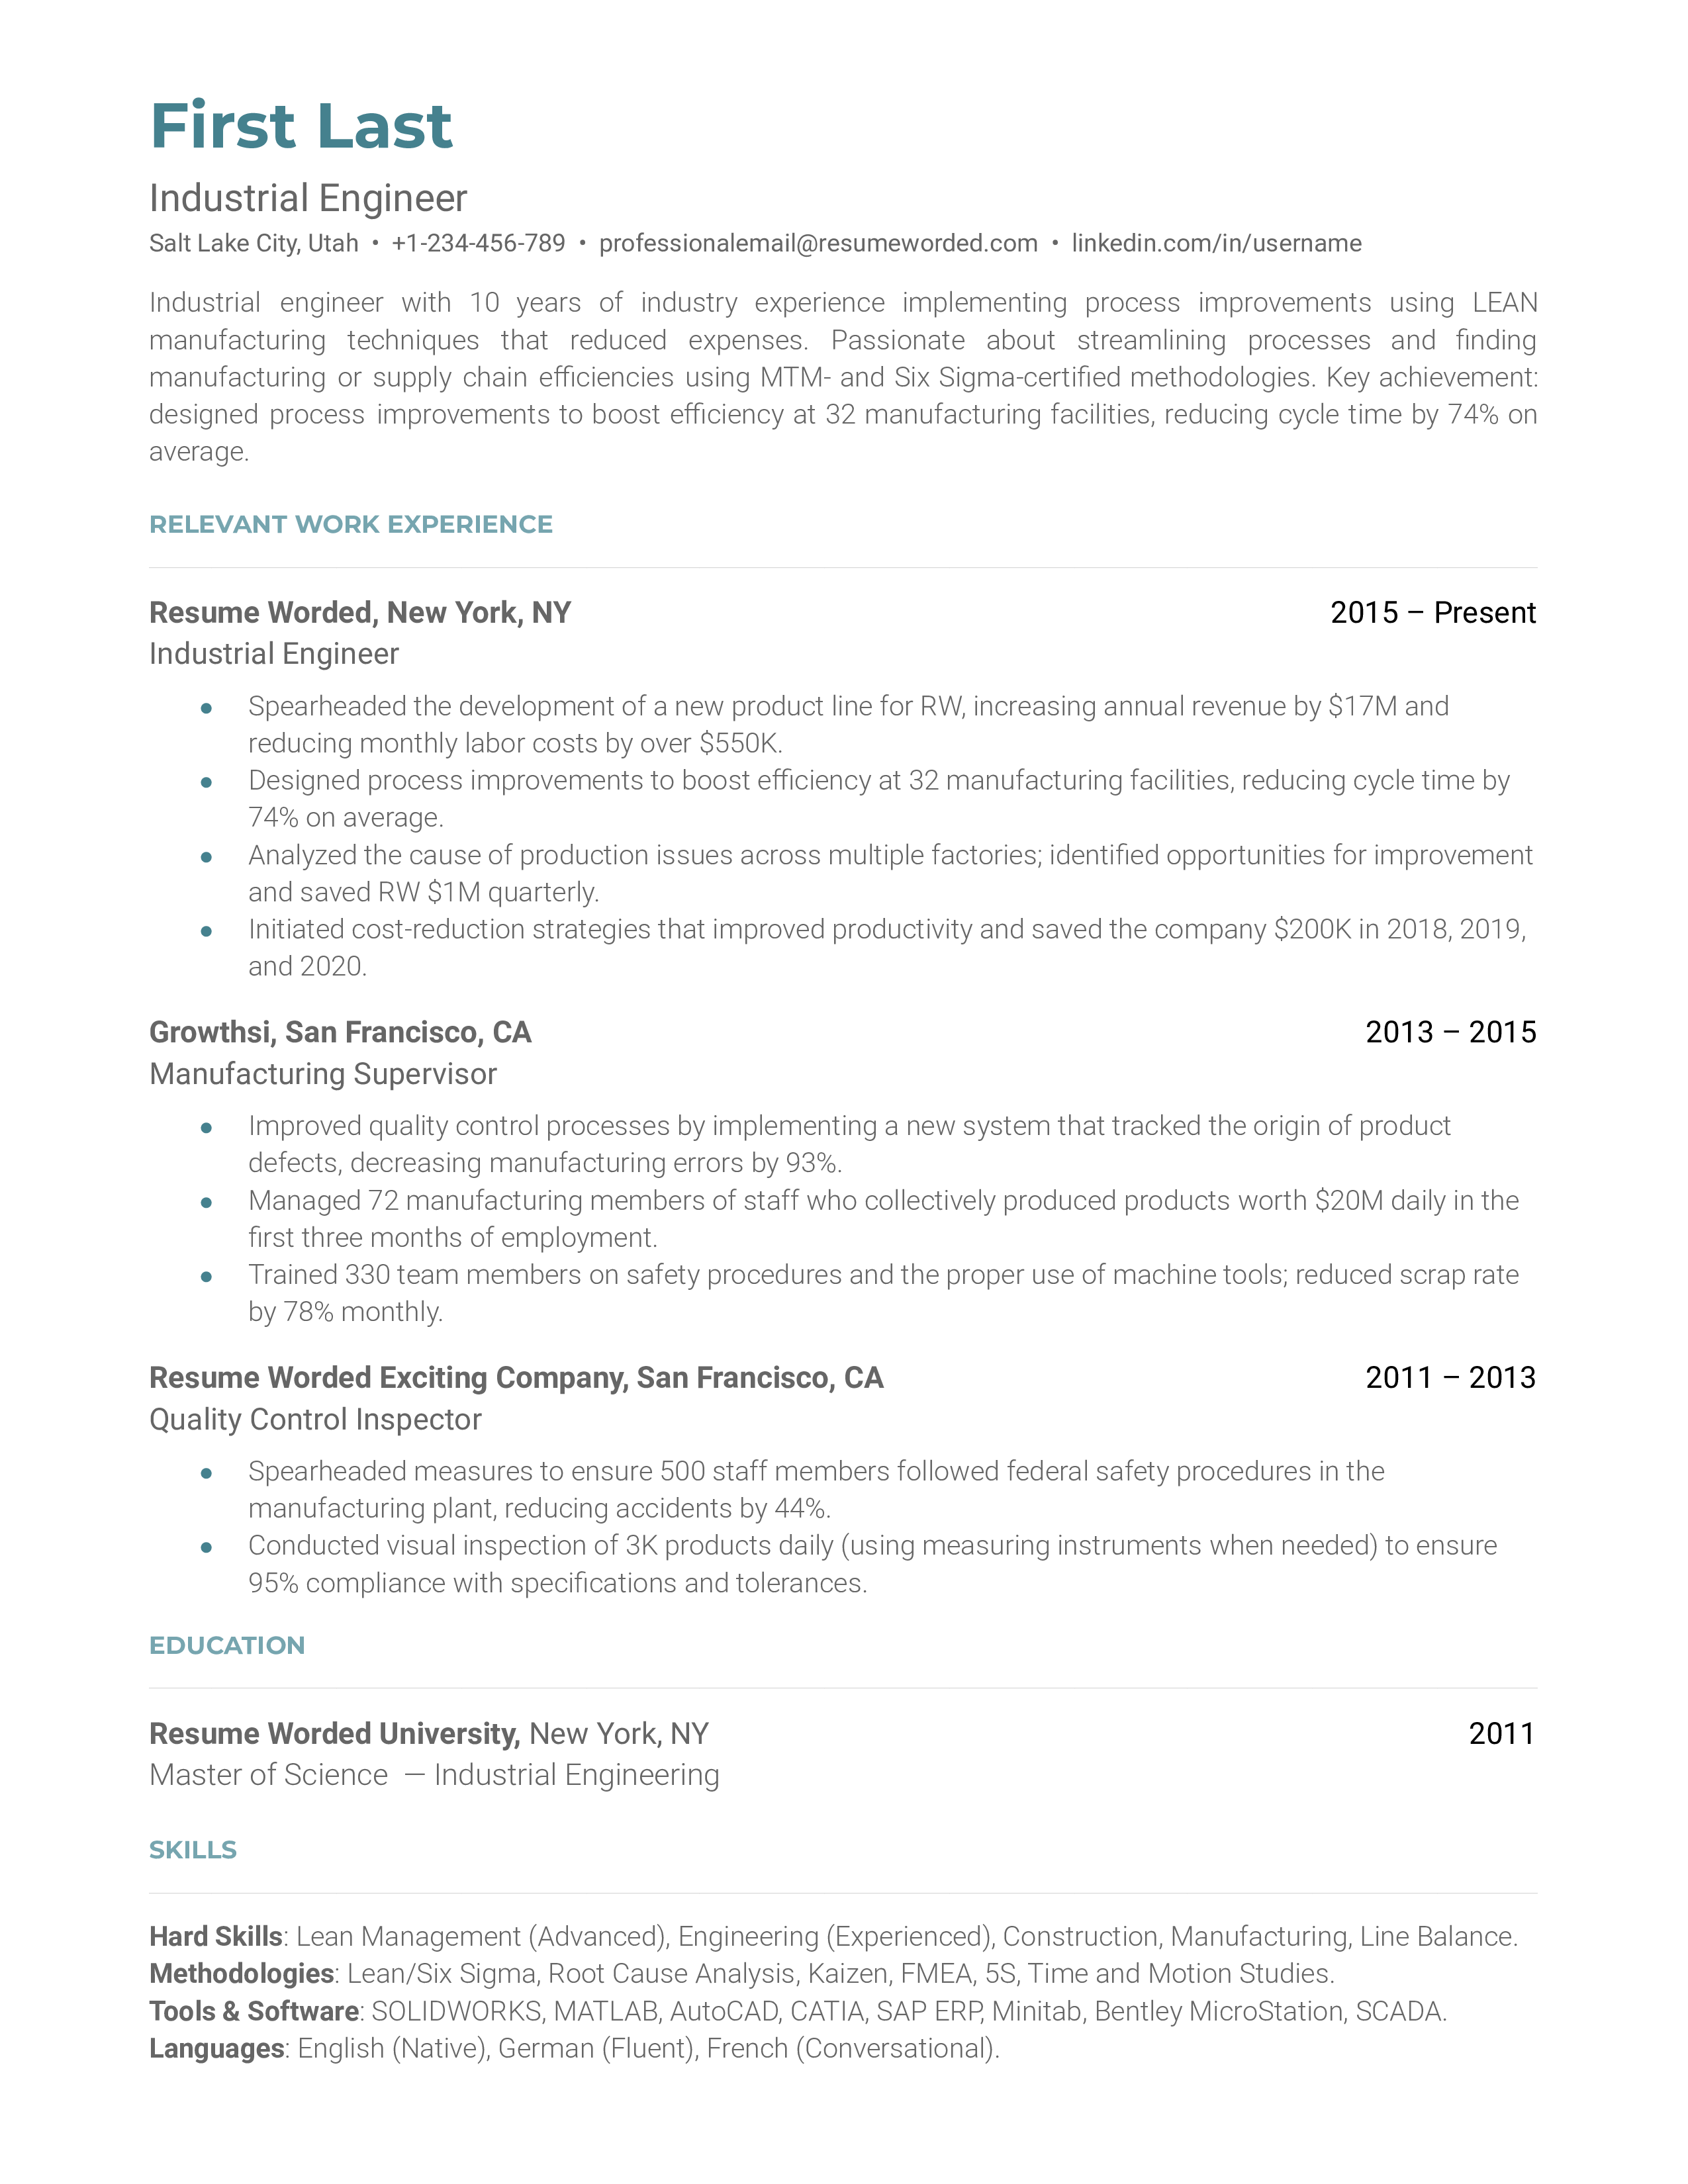 An industrial engineer resume template that emphasizes work experience